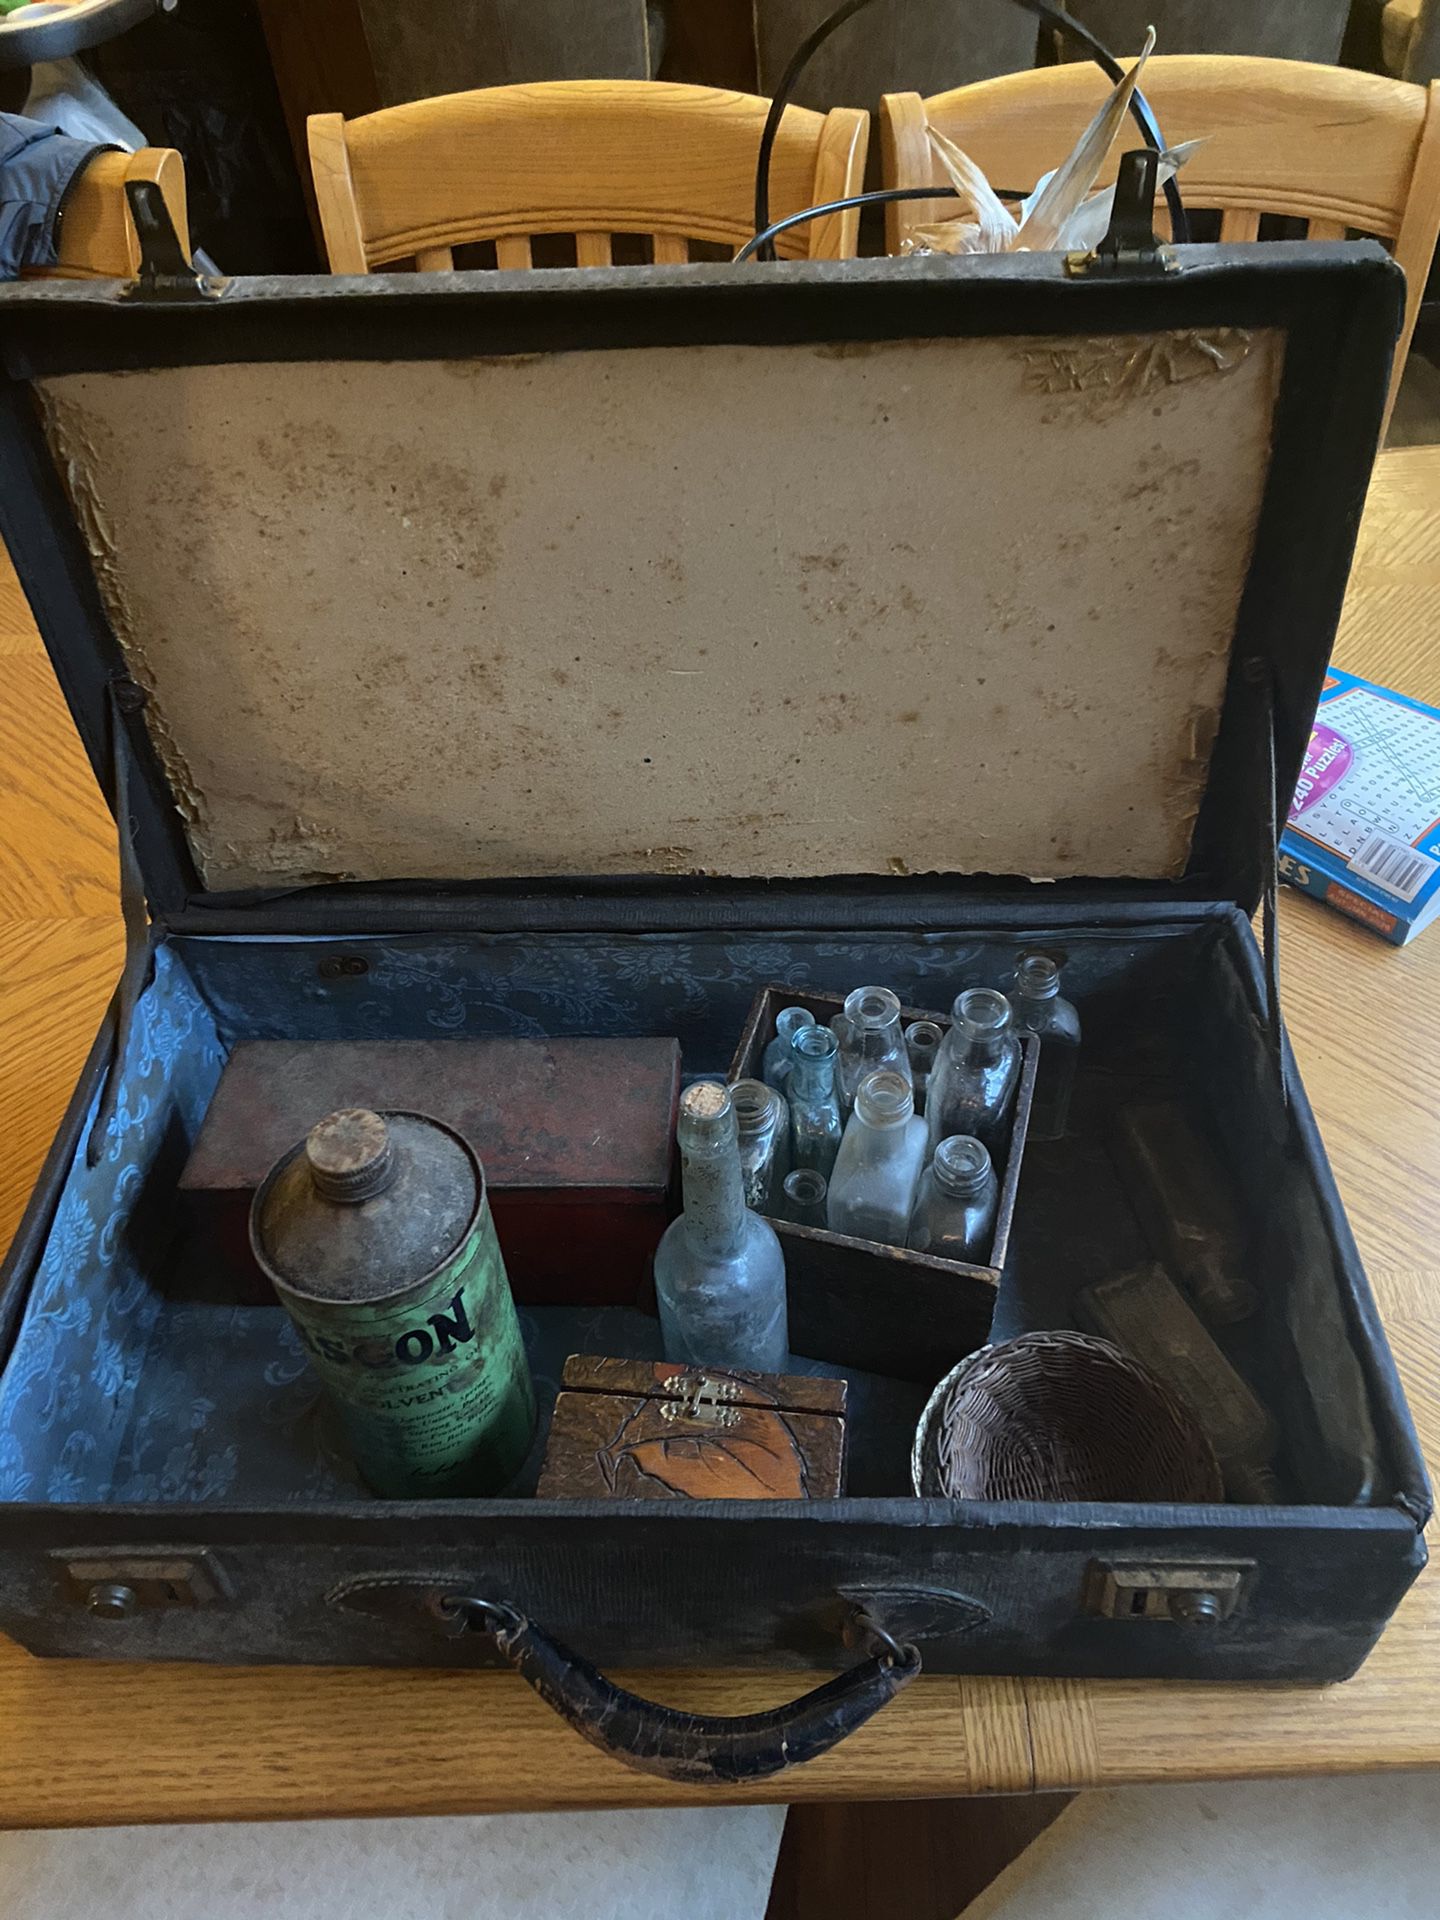 Antique suitcase with items inside